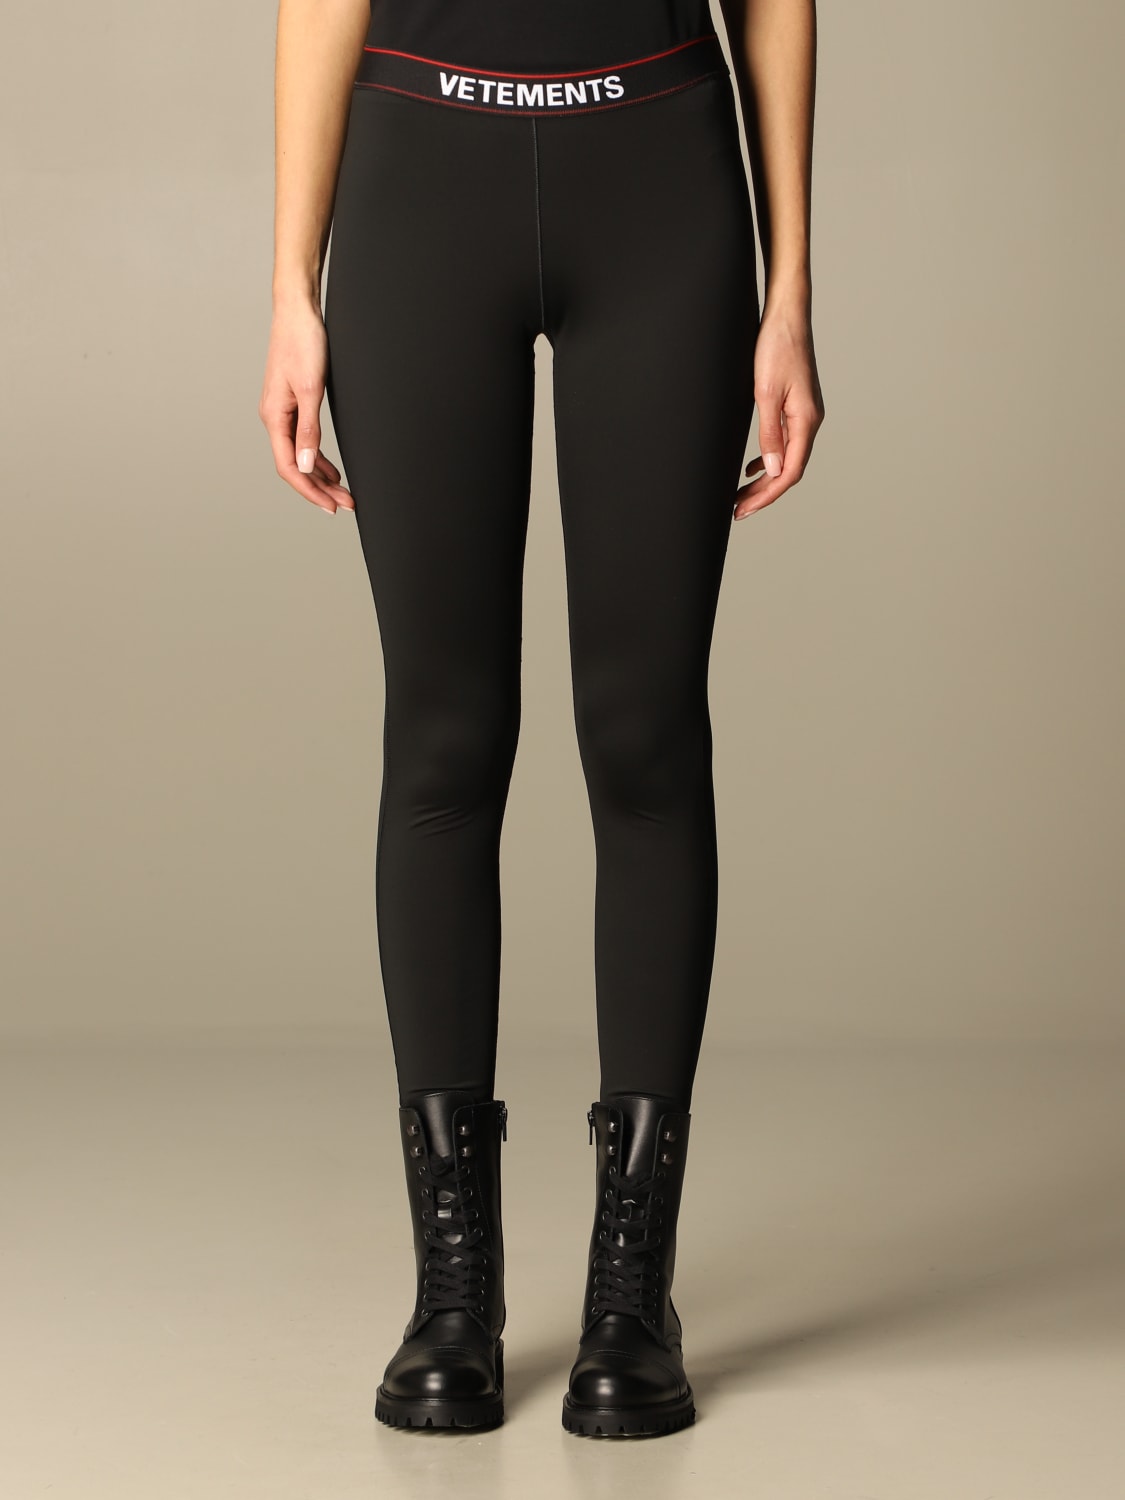 Vetements stretch leggings with logo